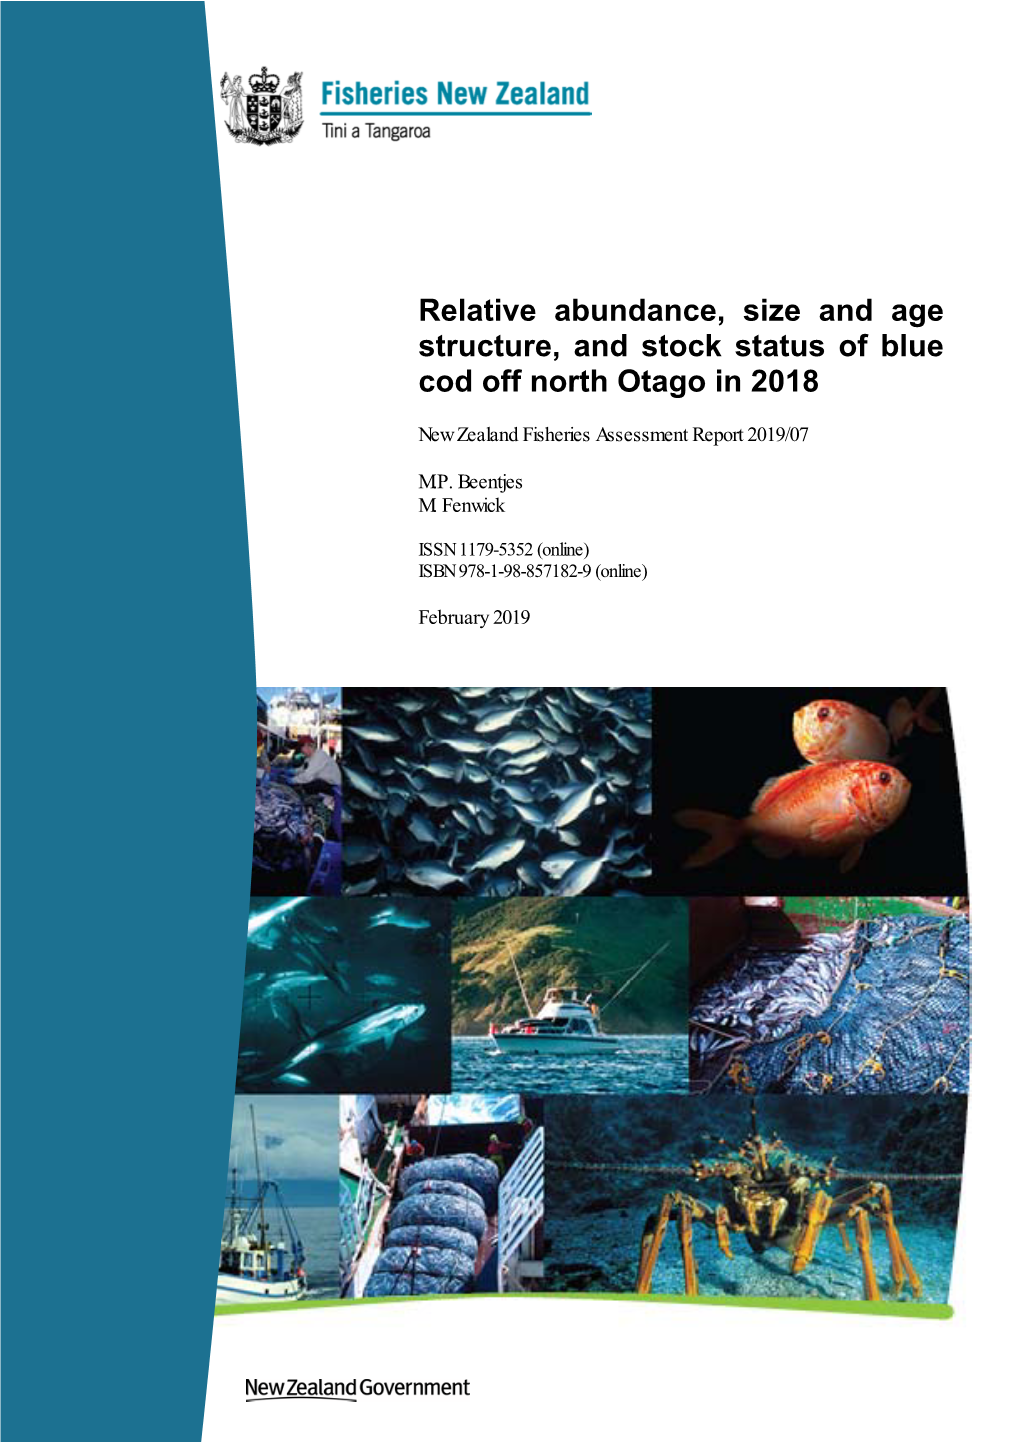 Relative Abundance, Size and Age Structure, and Stock Status of Blue Cod Off North Otago in 2018